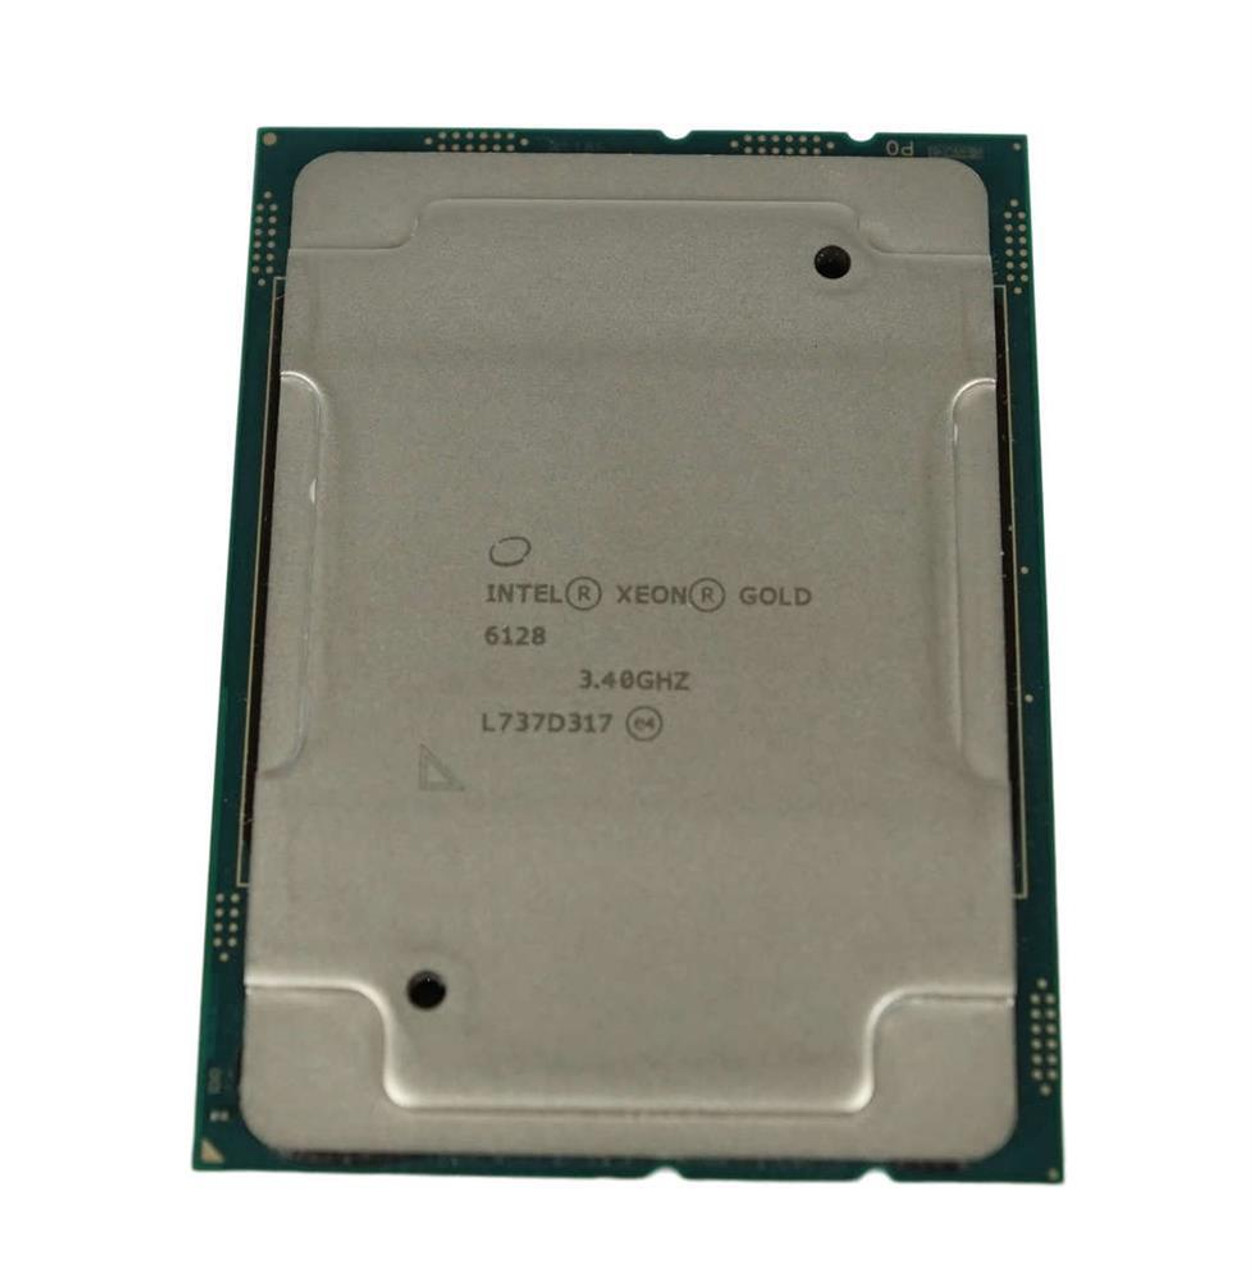 HPE 3.40GHz 10.40GT/s UPI 19.25MB L3 Cache Intel Xeon Gold 6128 6-Core Processor Upgrade